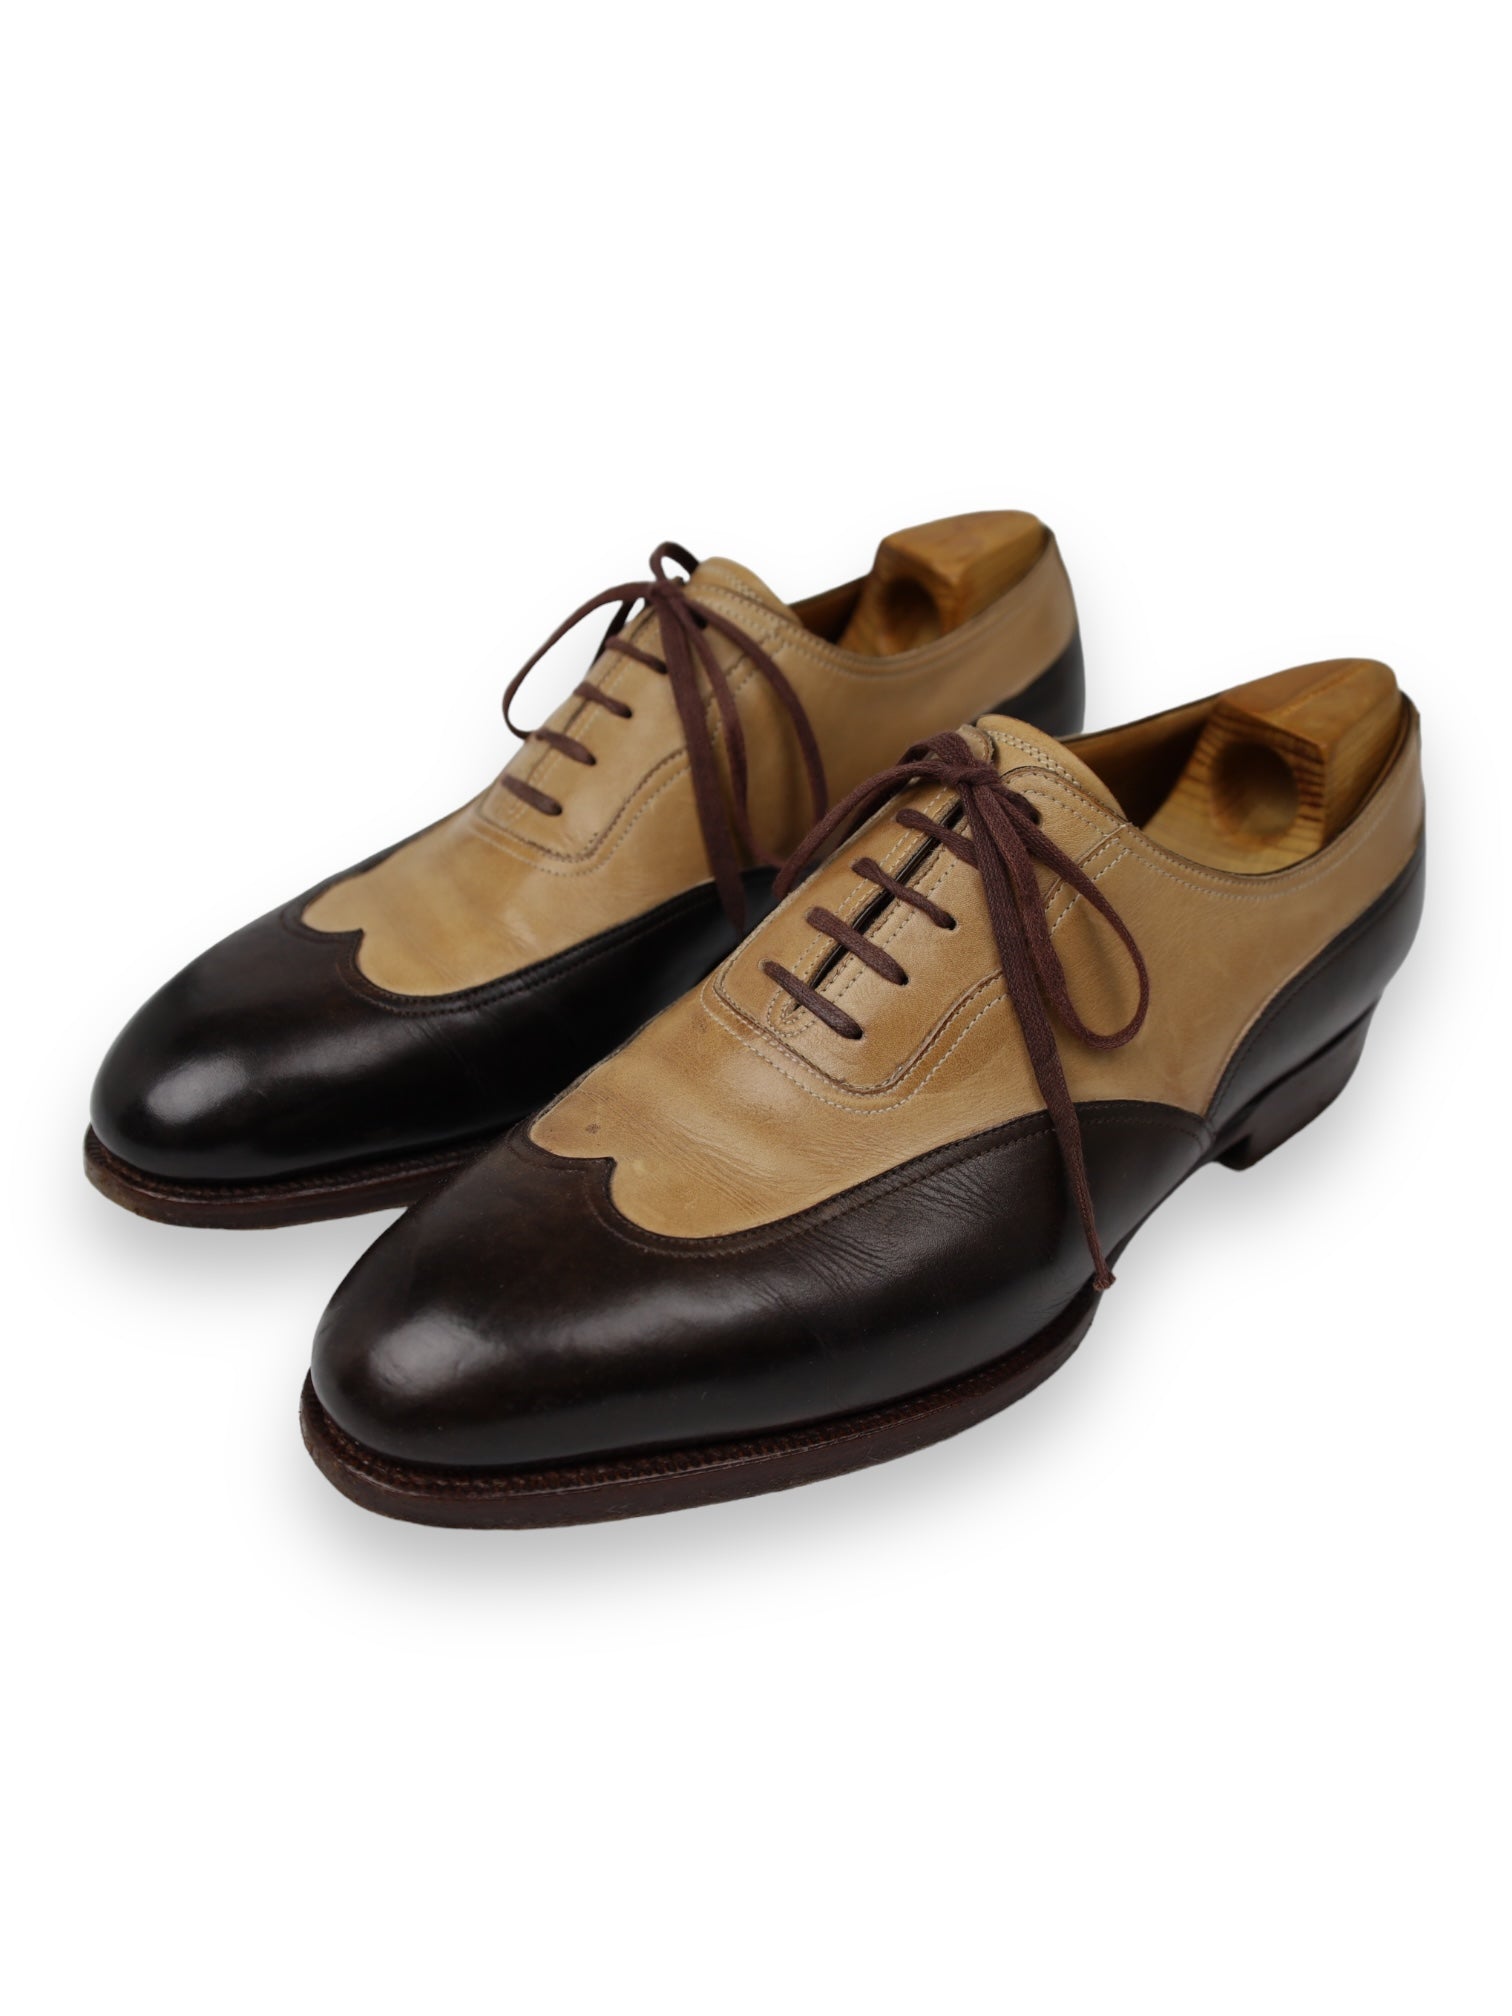 Saint Crispins Brown Wing-Tip Oxford Shoes